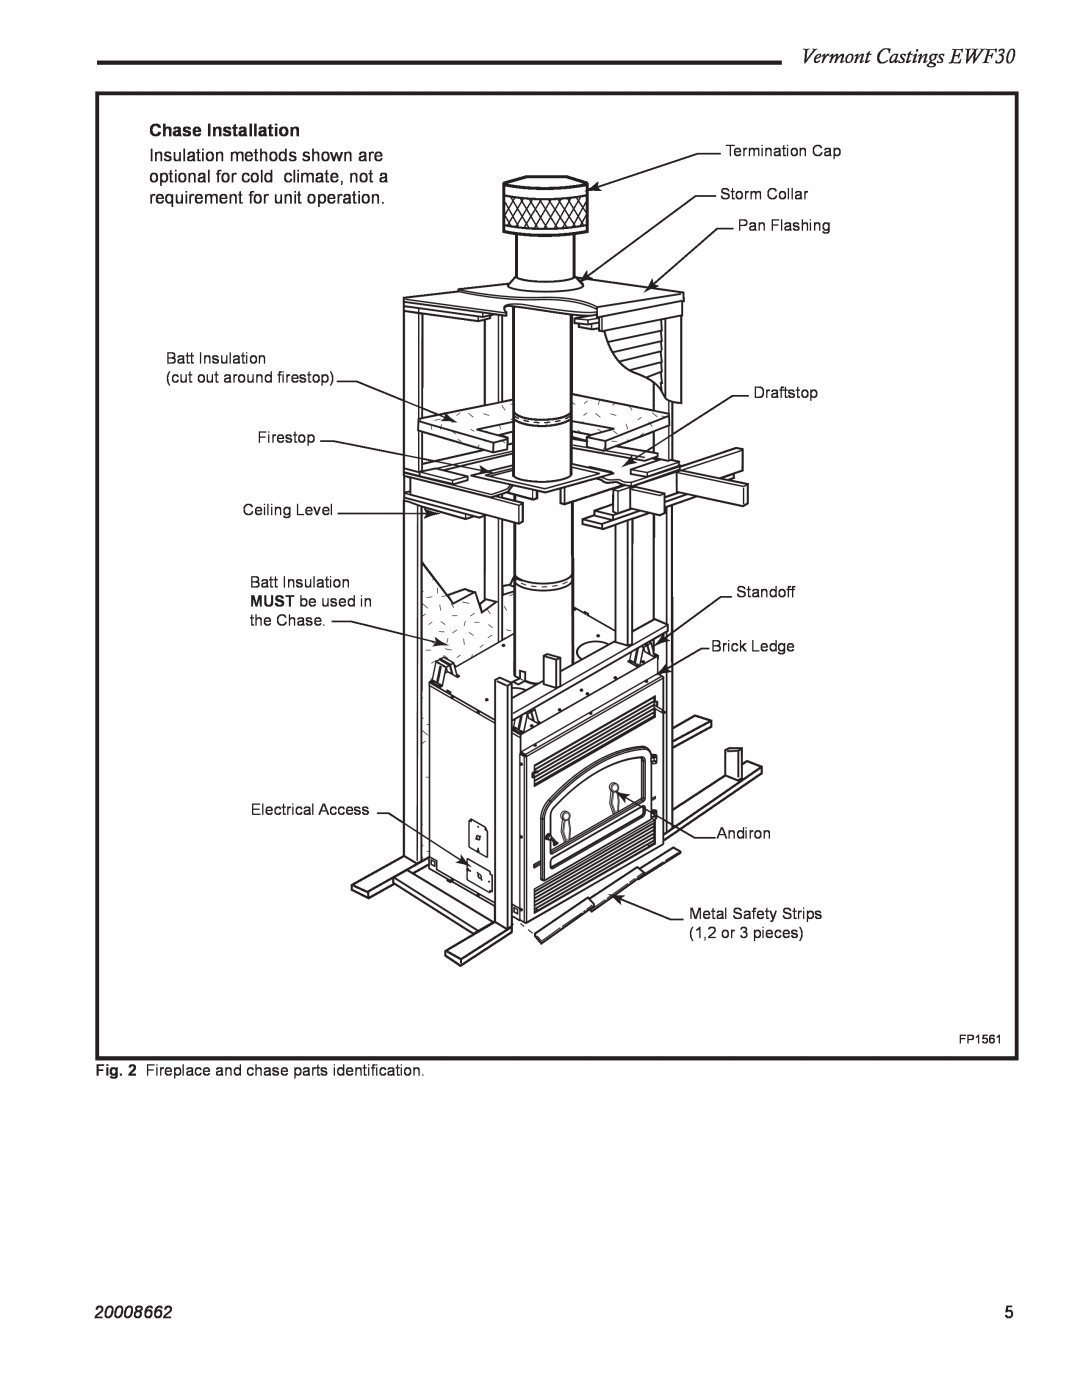 Vermont Casting installation instructions Vermont Castings EWF30, Chase Installation, 20008662 